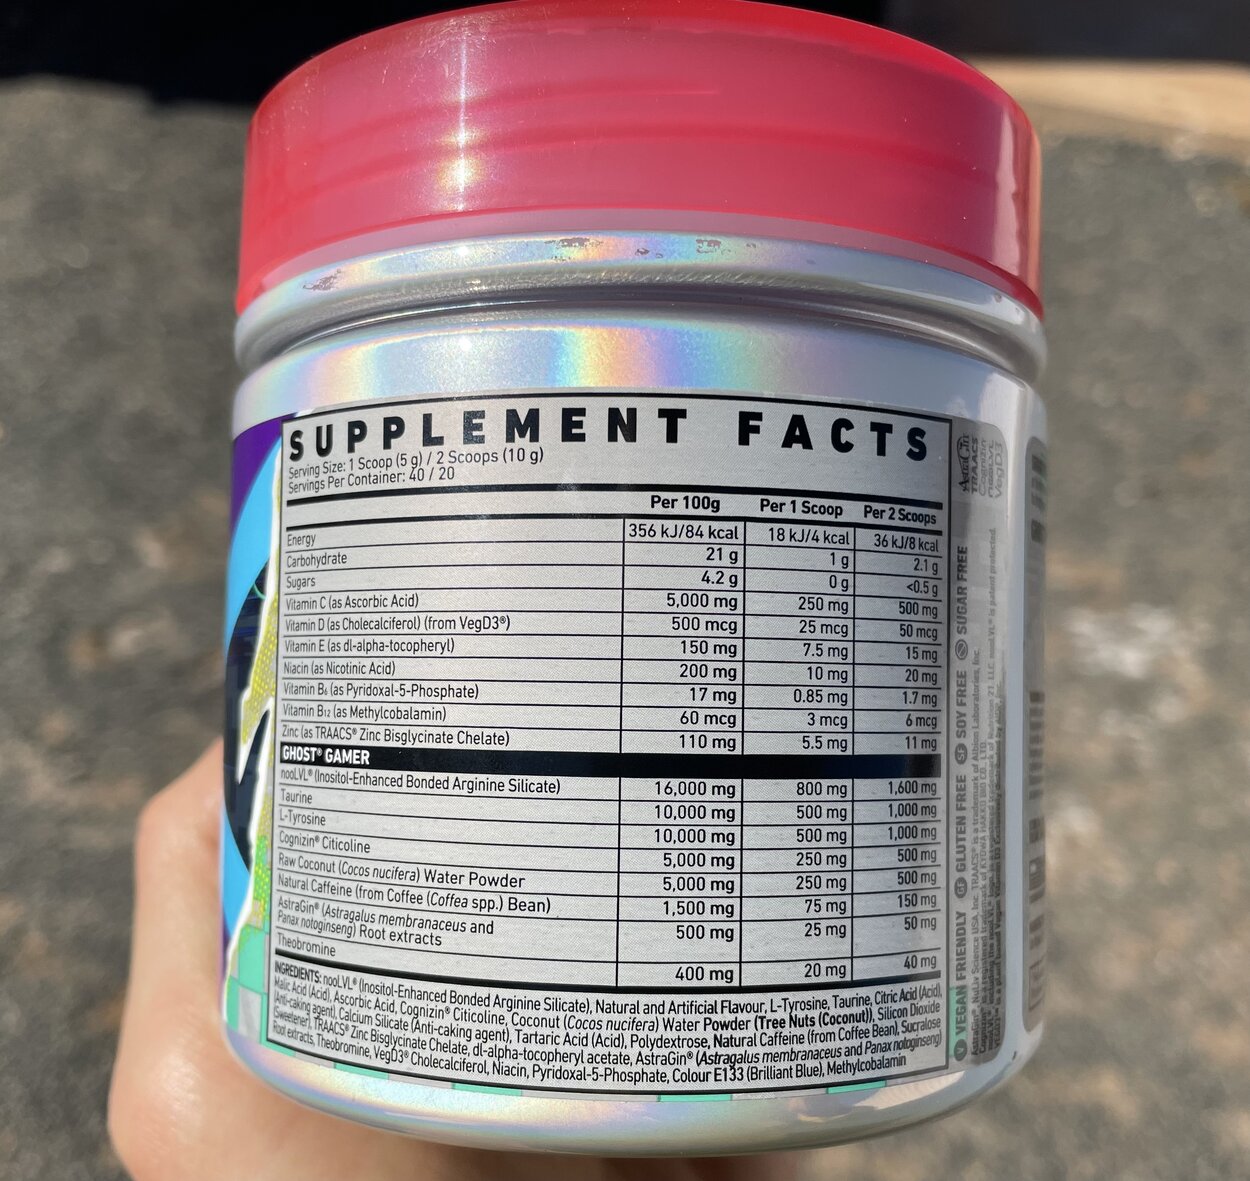 Supplement facts label printed at the back of a Ghost Gamer energy drink tub.